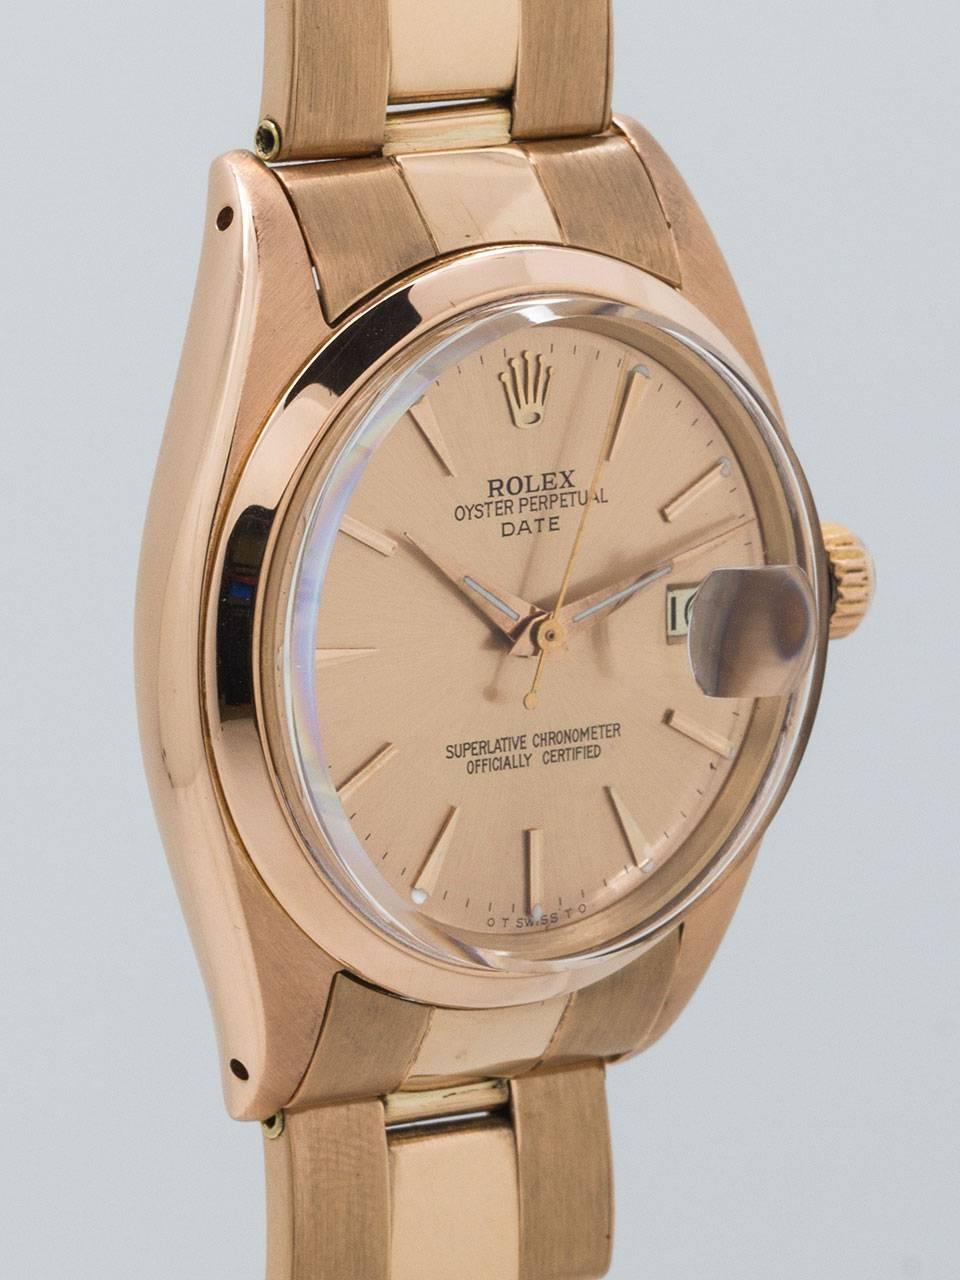 Rolex 18K Rose Gold Oyster Perpetual Date ref 1500 serial #715,xxx circa 1961. 34mm diameter man’s size model with smooth bezel and acrylic crystal. Beautifully restored rose dial with pink applied indexes and pink baton hands. Powered by self